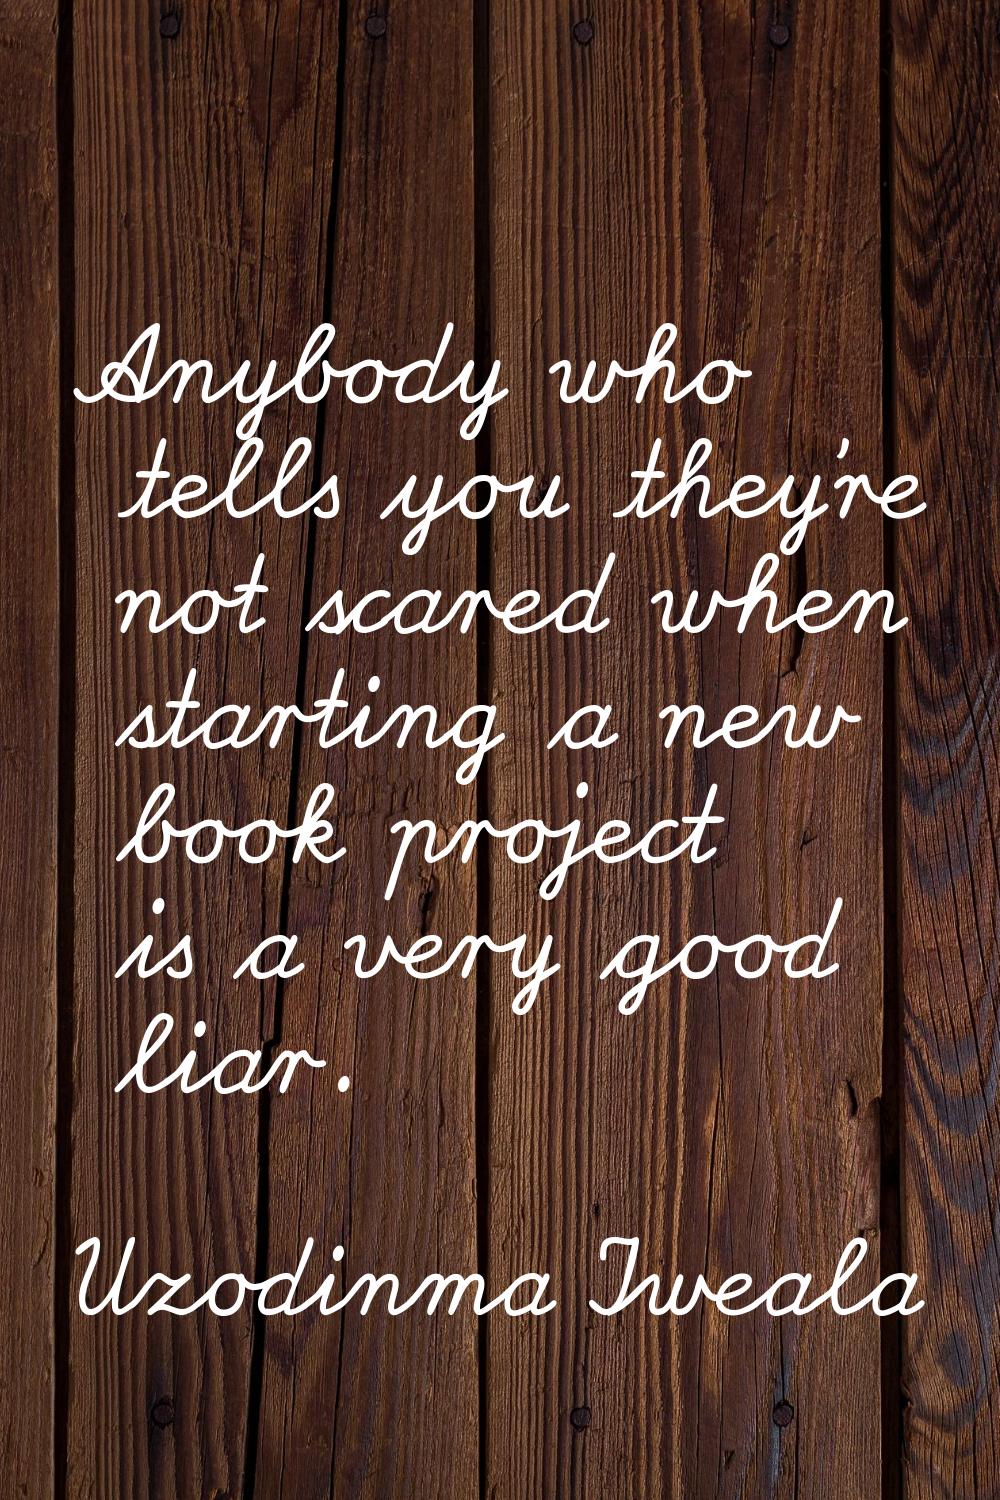 Anybody who tells you they're not scared when starting a new book project is a very good liar.